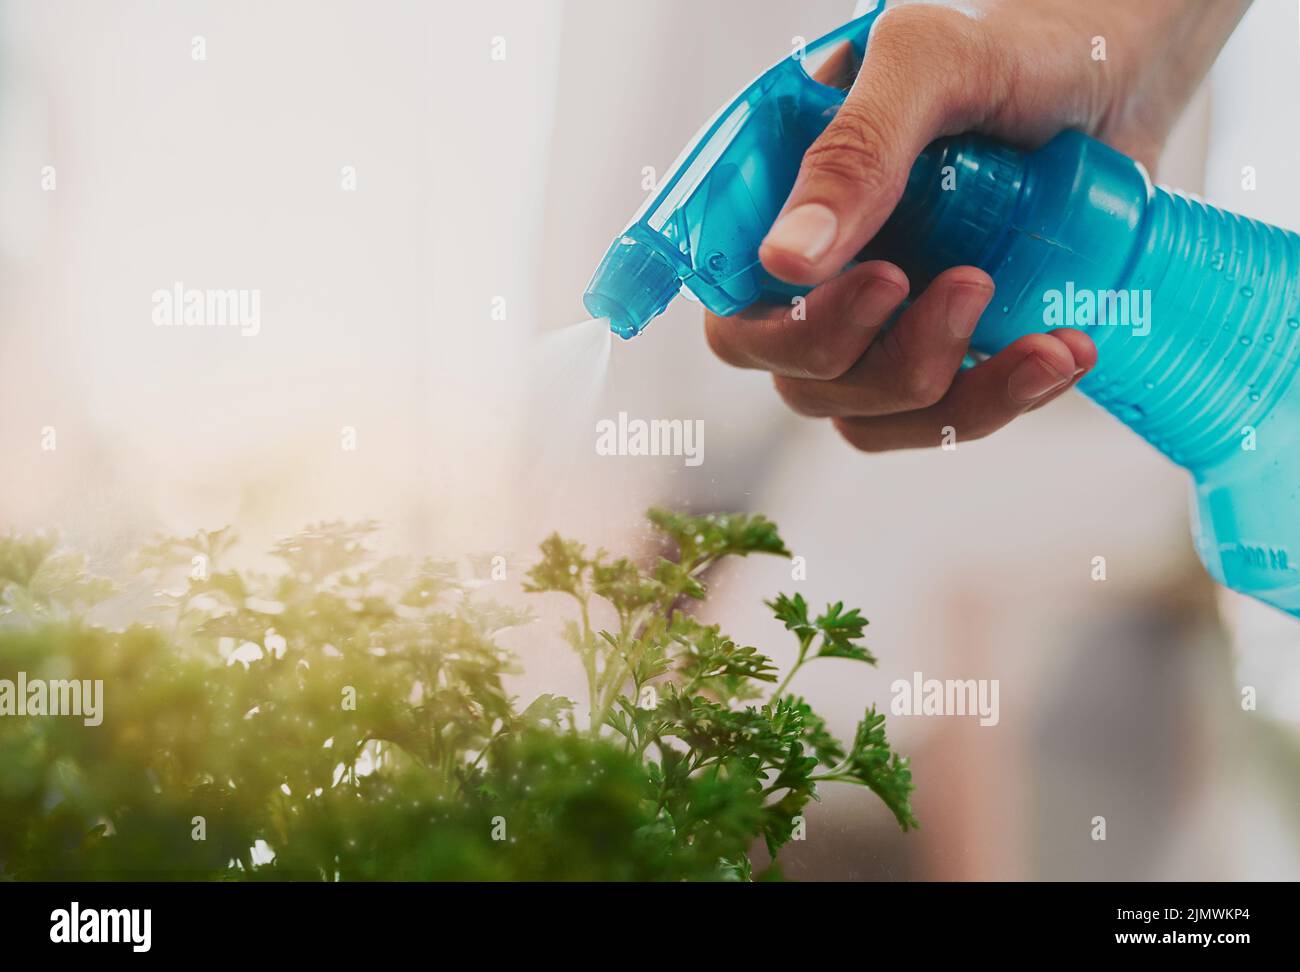 Water will keep the plant growing healthily. an unrecognizable young boy watering some plants at home. Stock Photo